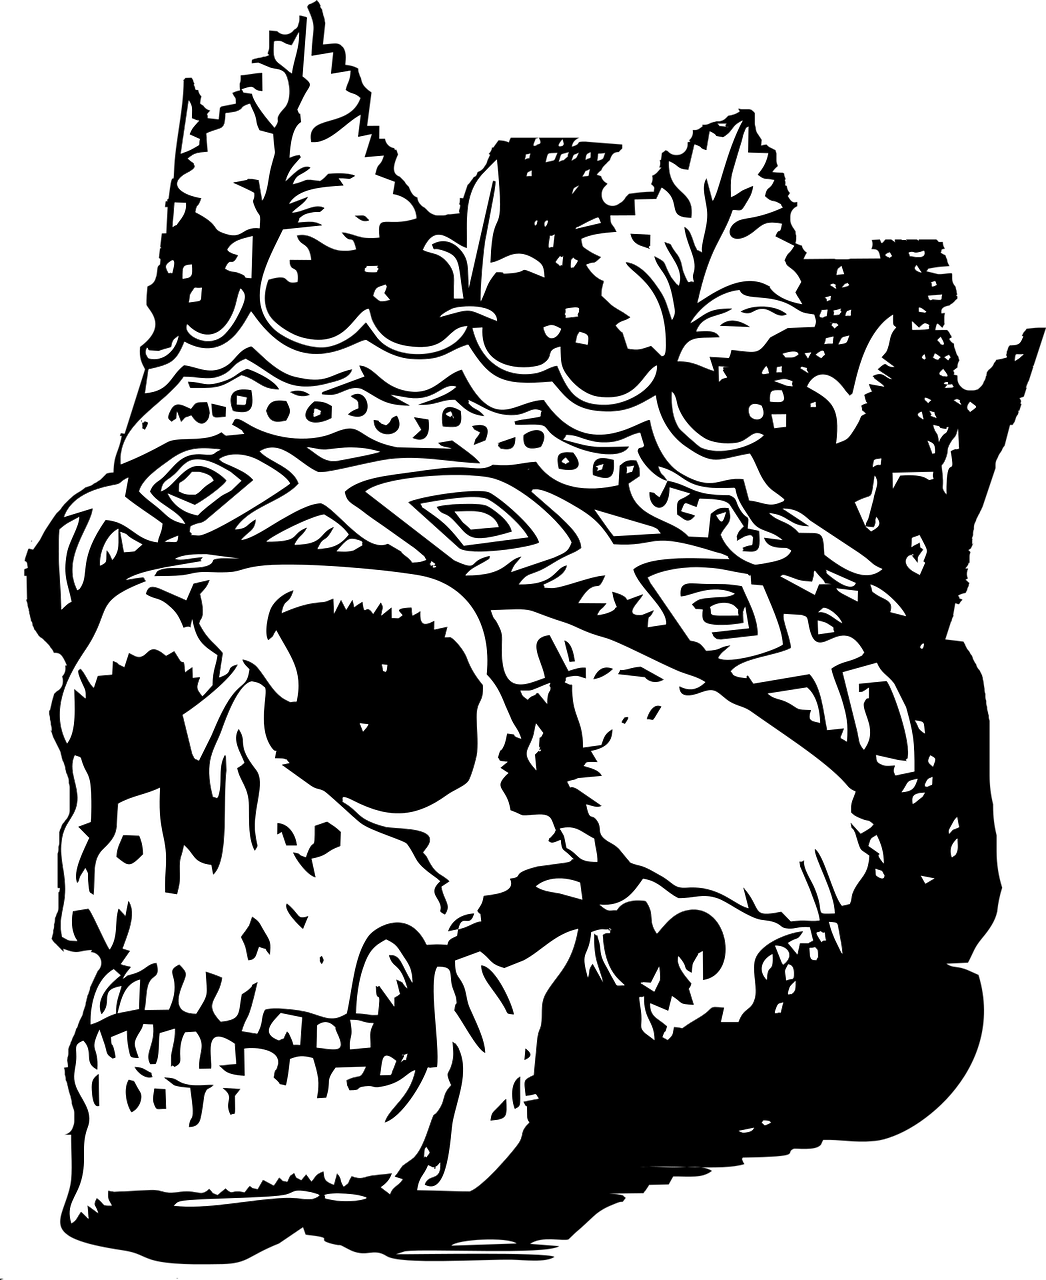 skull with crown skull crown free photo